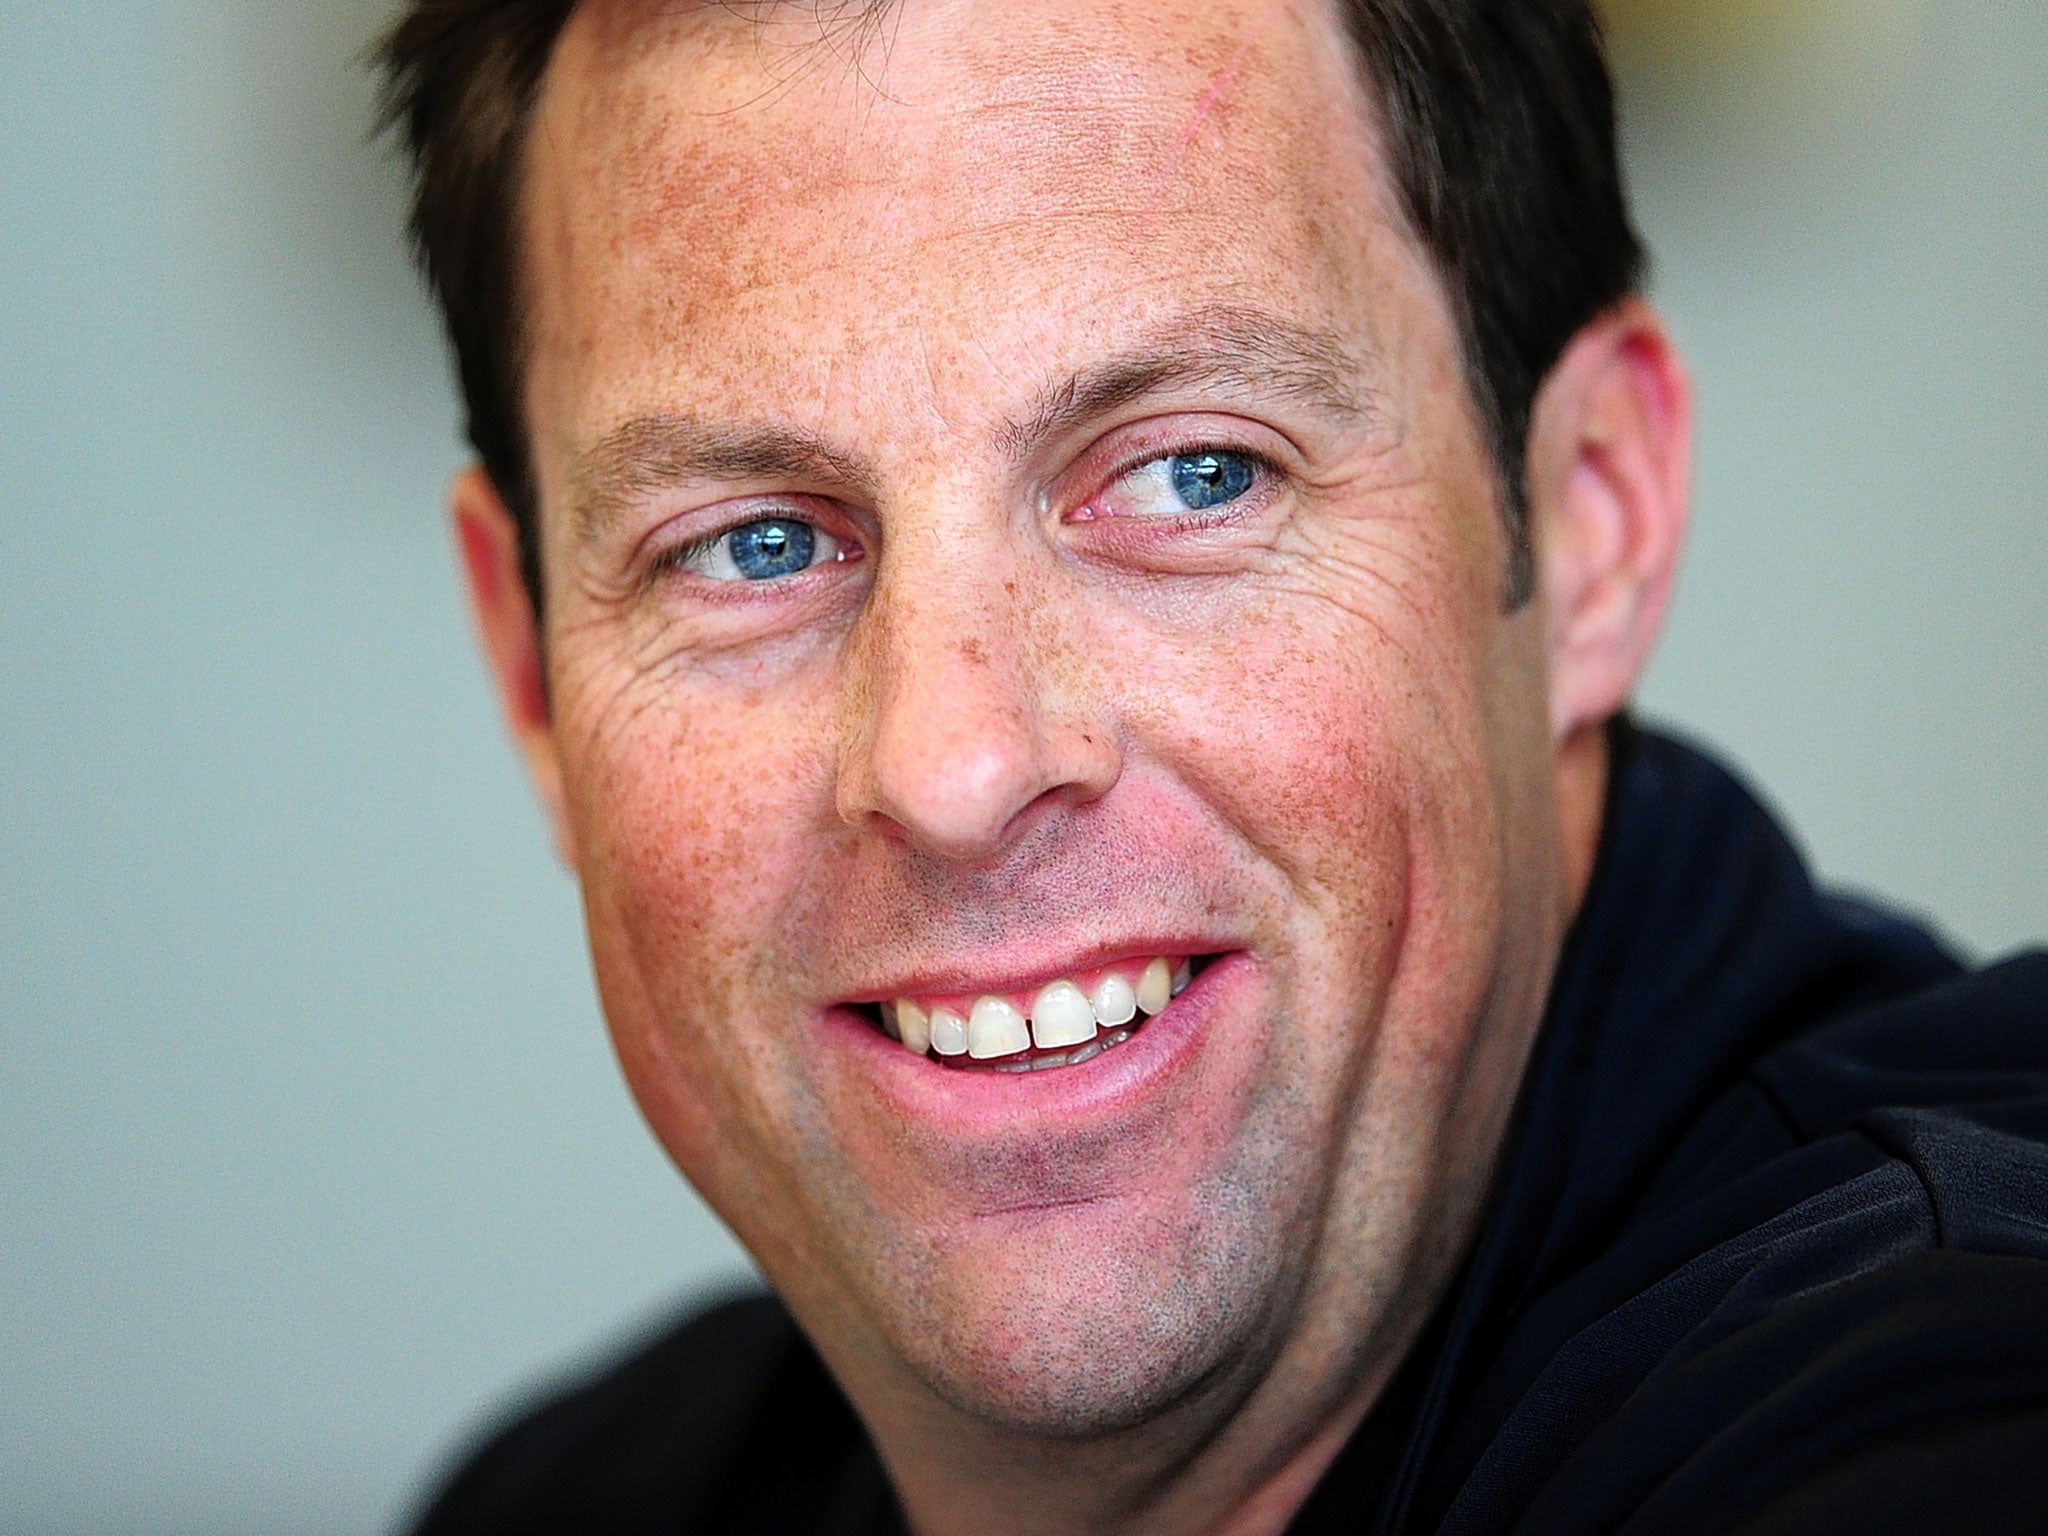 Marcus Trescothick was back on top form for Somerset last season after a lean spell in 2013